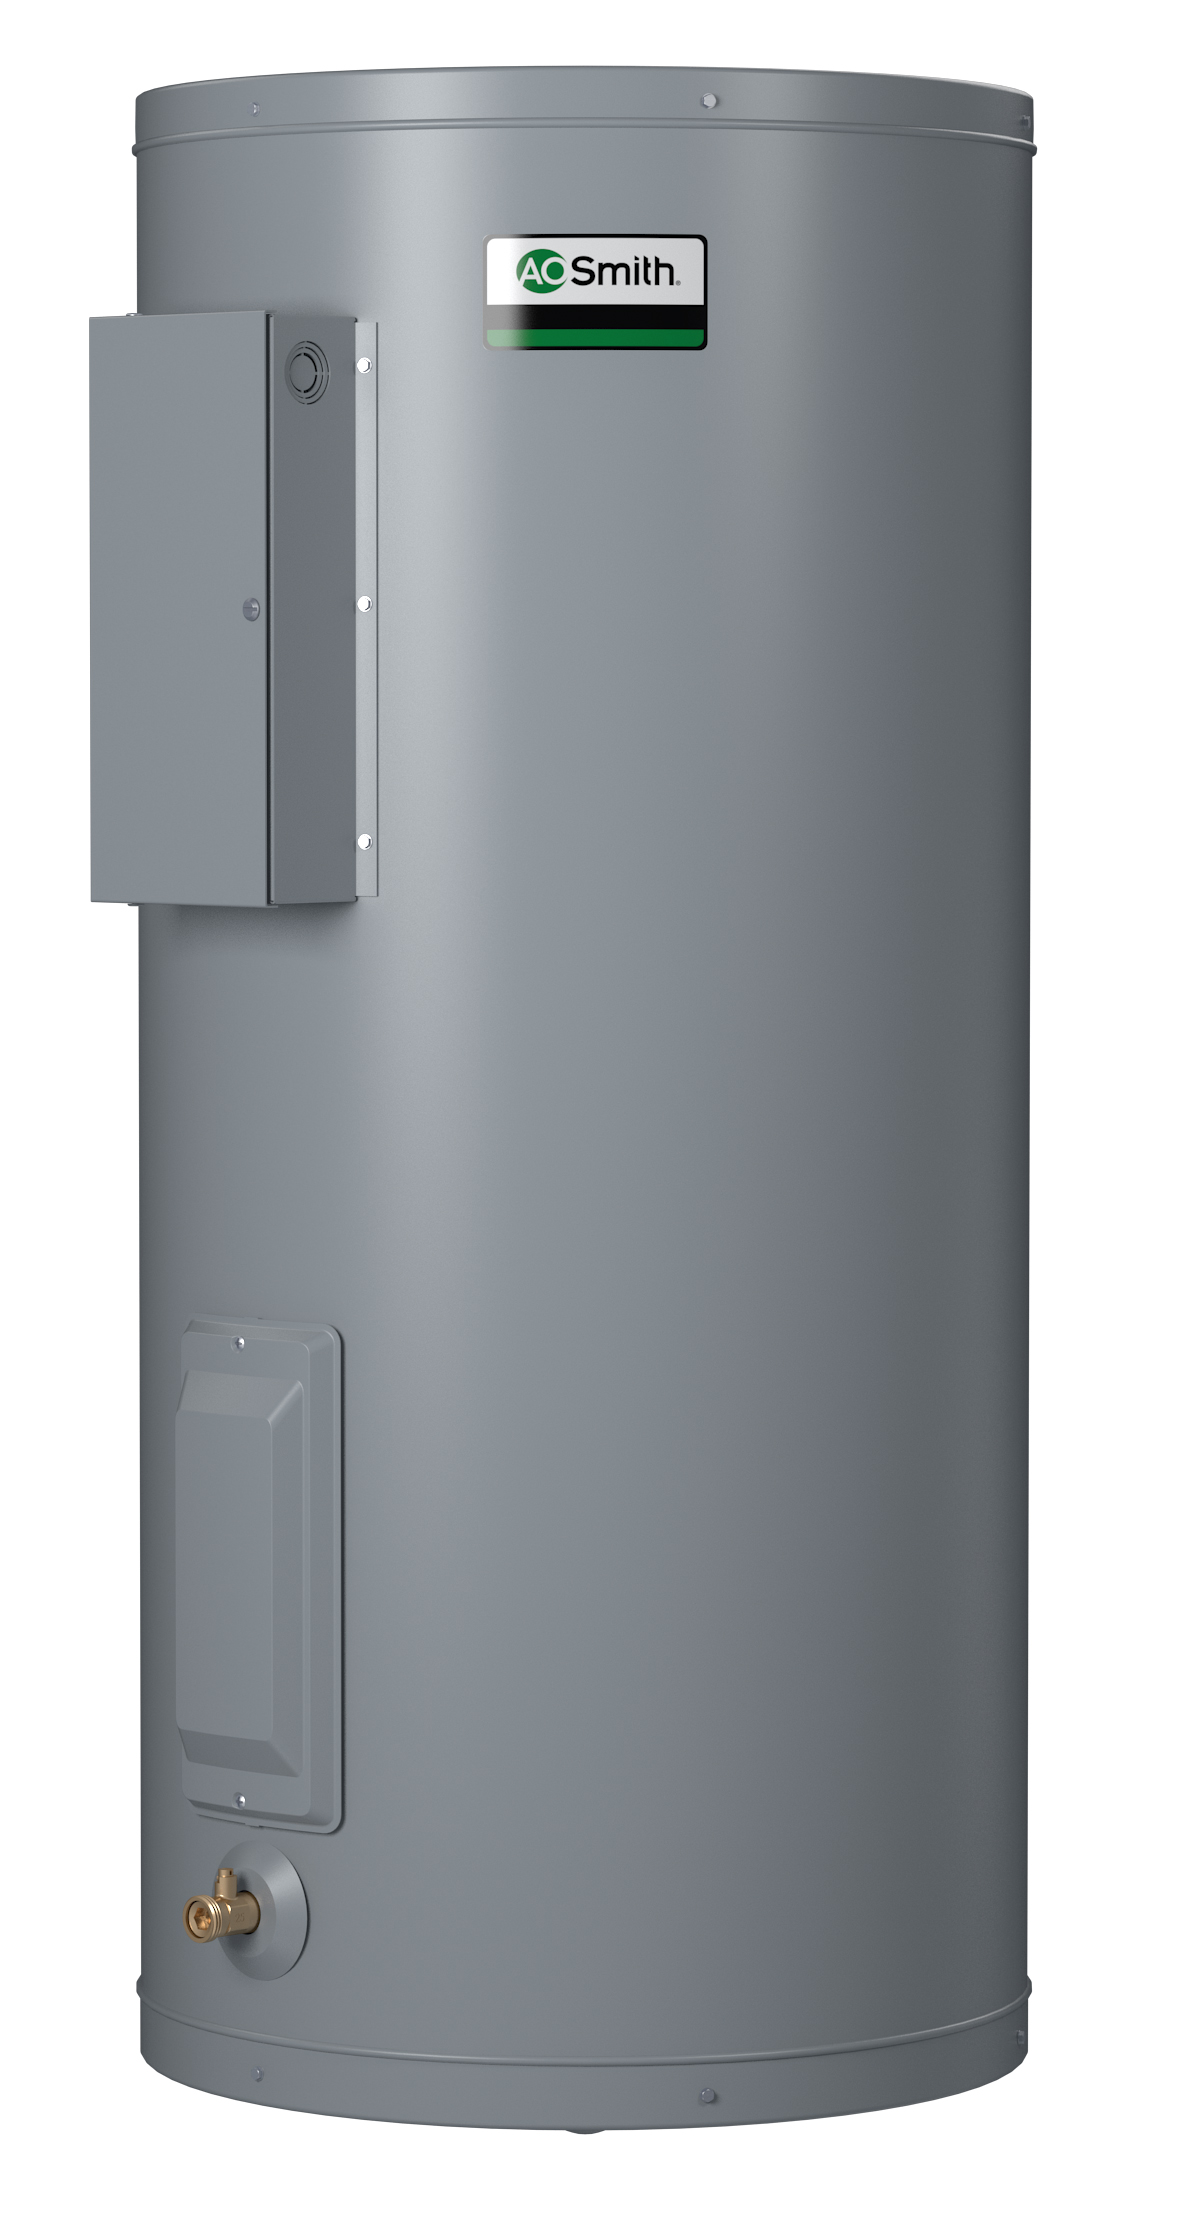 AO SMITH DEN-120D: 119 GALLONS, 2.5 KW, 120 VOLT, 1 PHASE, (2-2500 WATT ELEMENTS, NON-SIMULTANEOUS WIRING), DURA-POWER, LIGHT DUTY COMMERCIAL ELECTRIC WATER HEATER